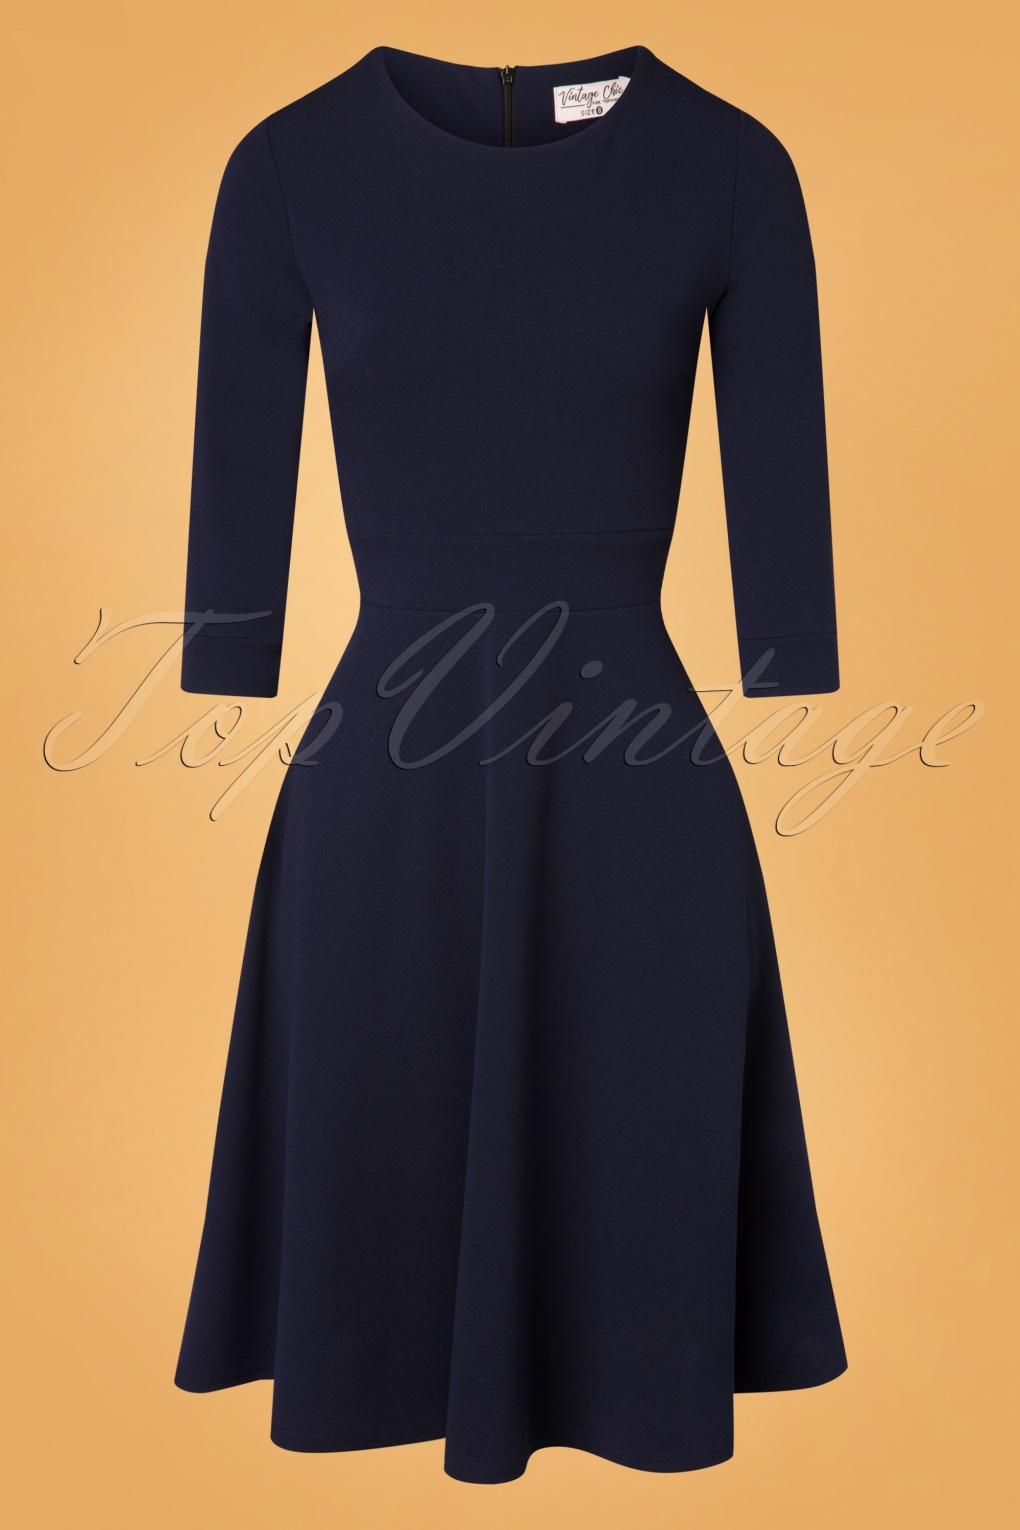 navy blue swing dress with sleeves